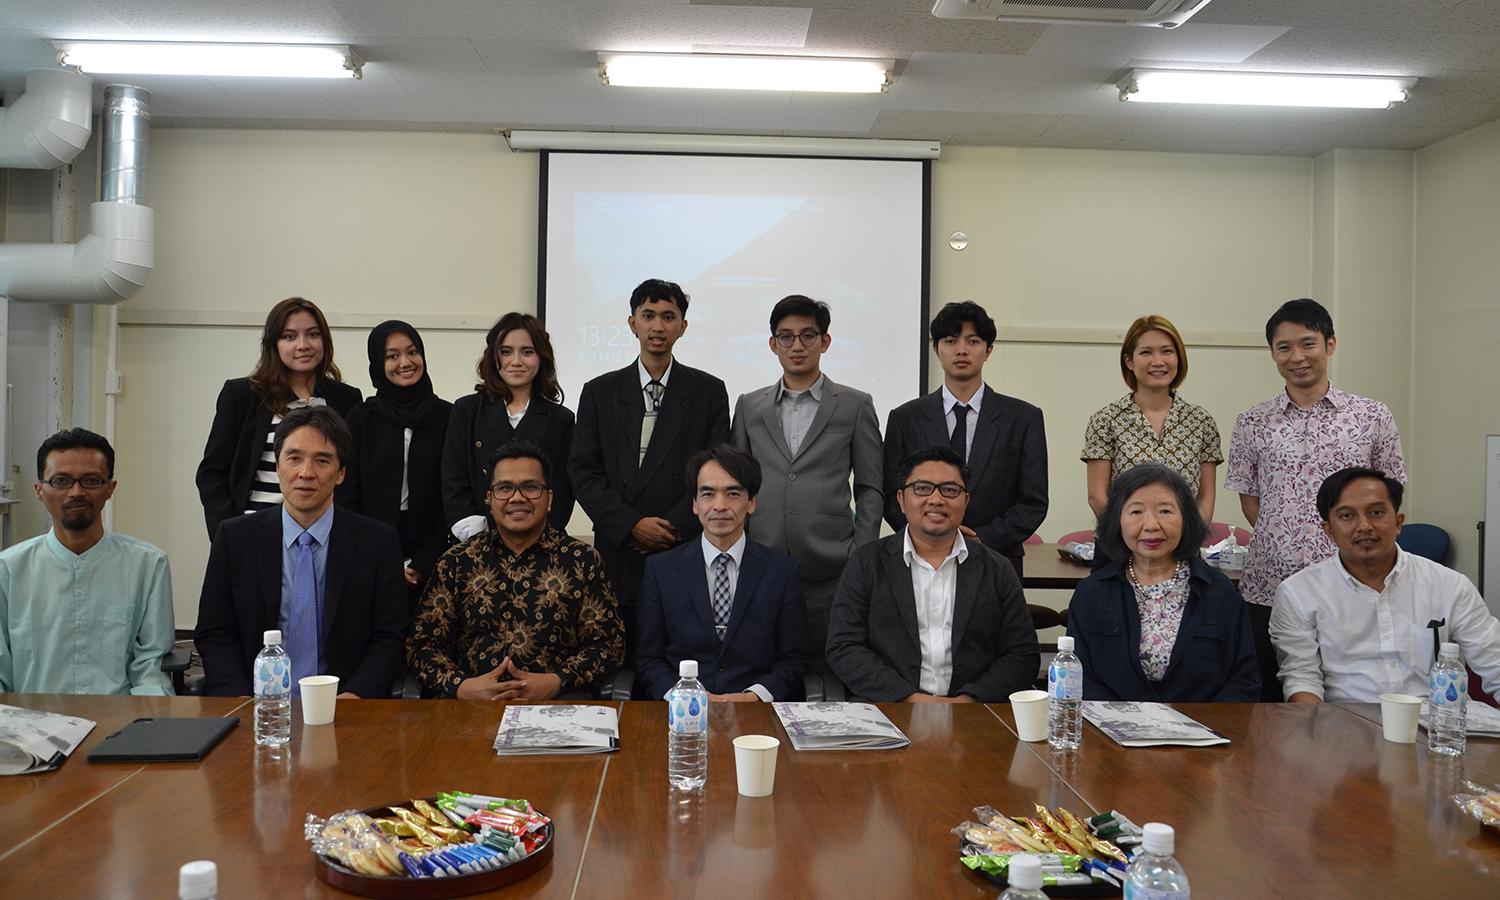 A group photo was taken after meeting with Prof. Kashiwagi, Dean of the College of International Studies.